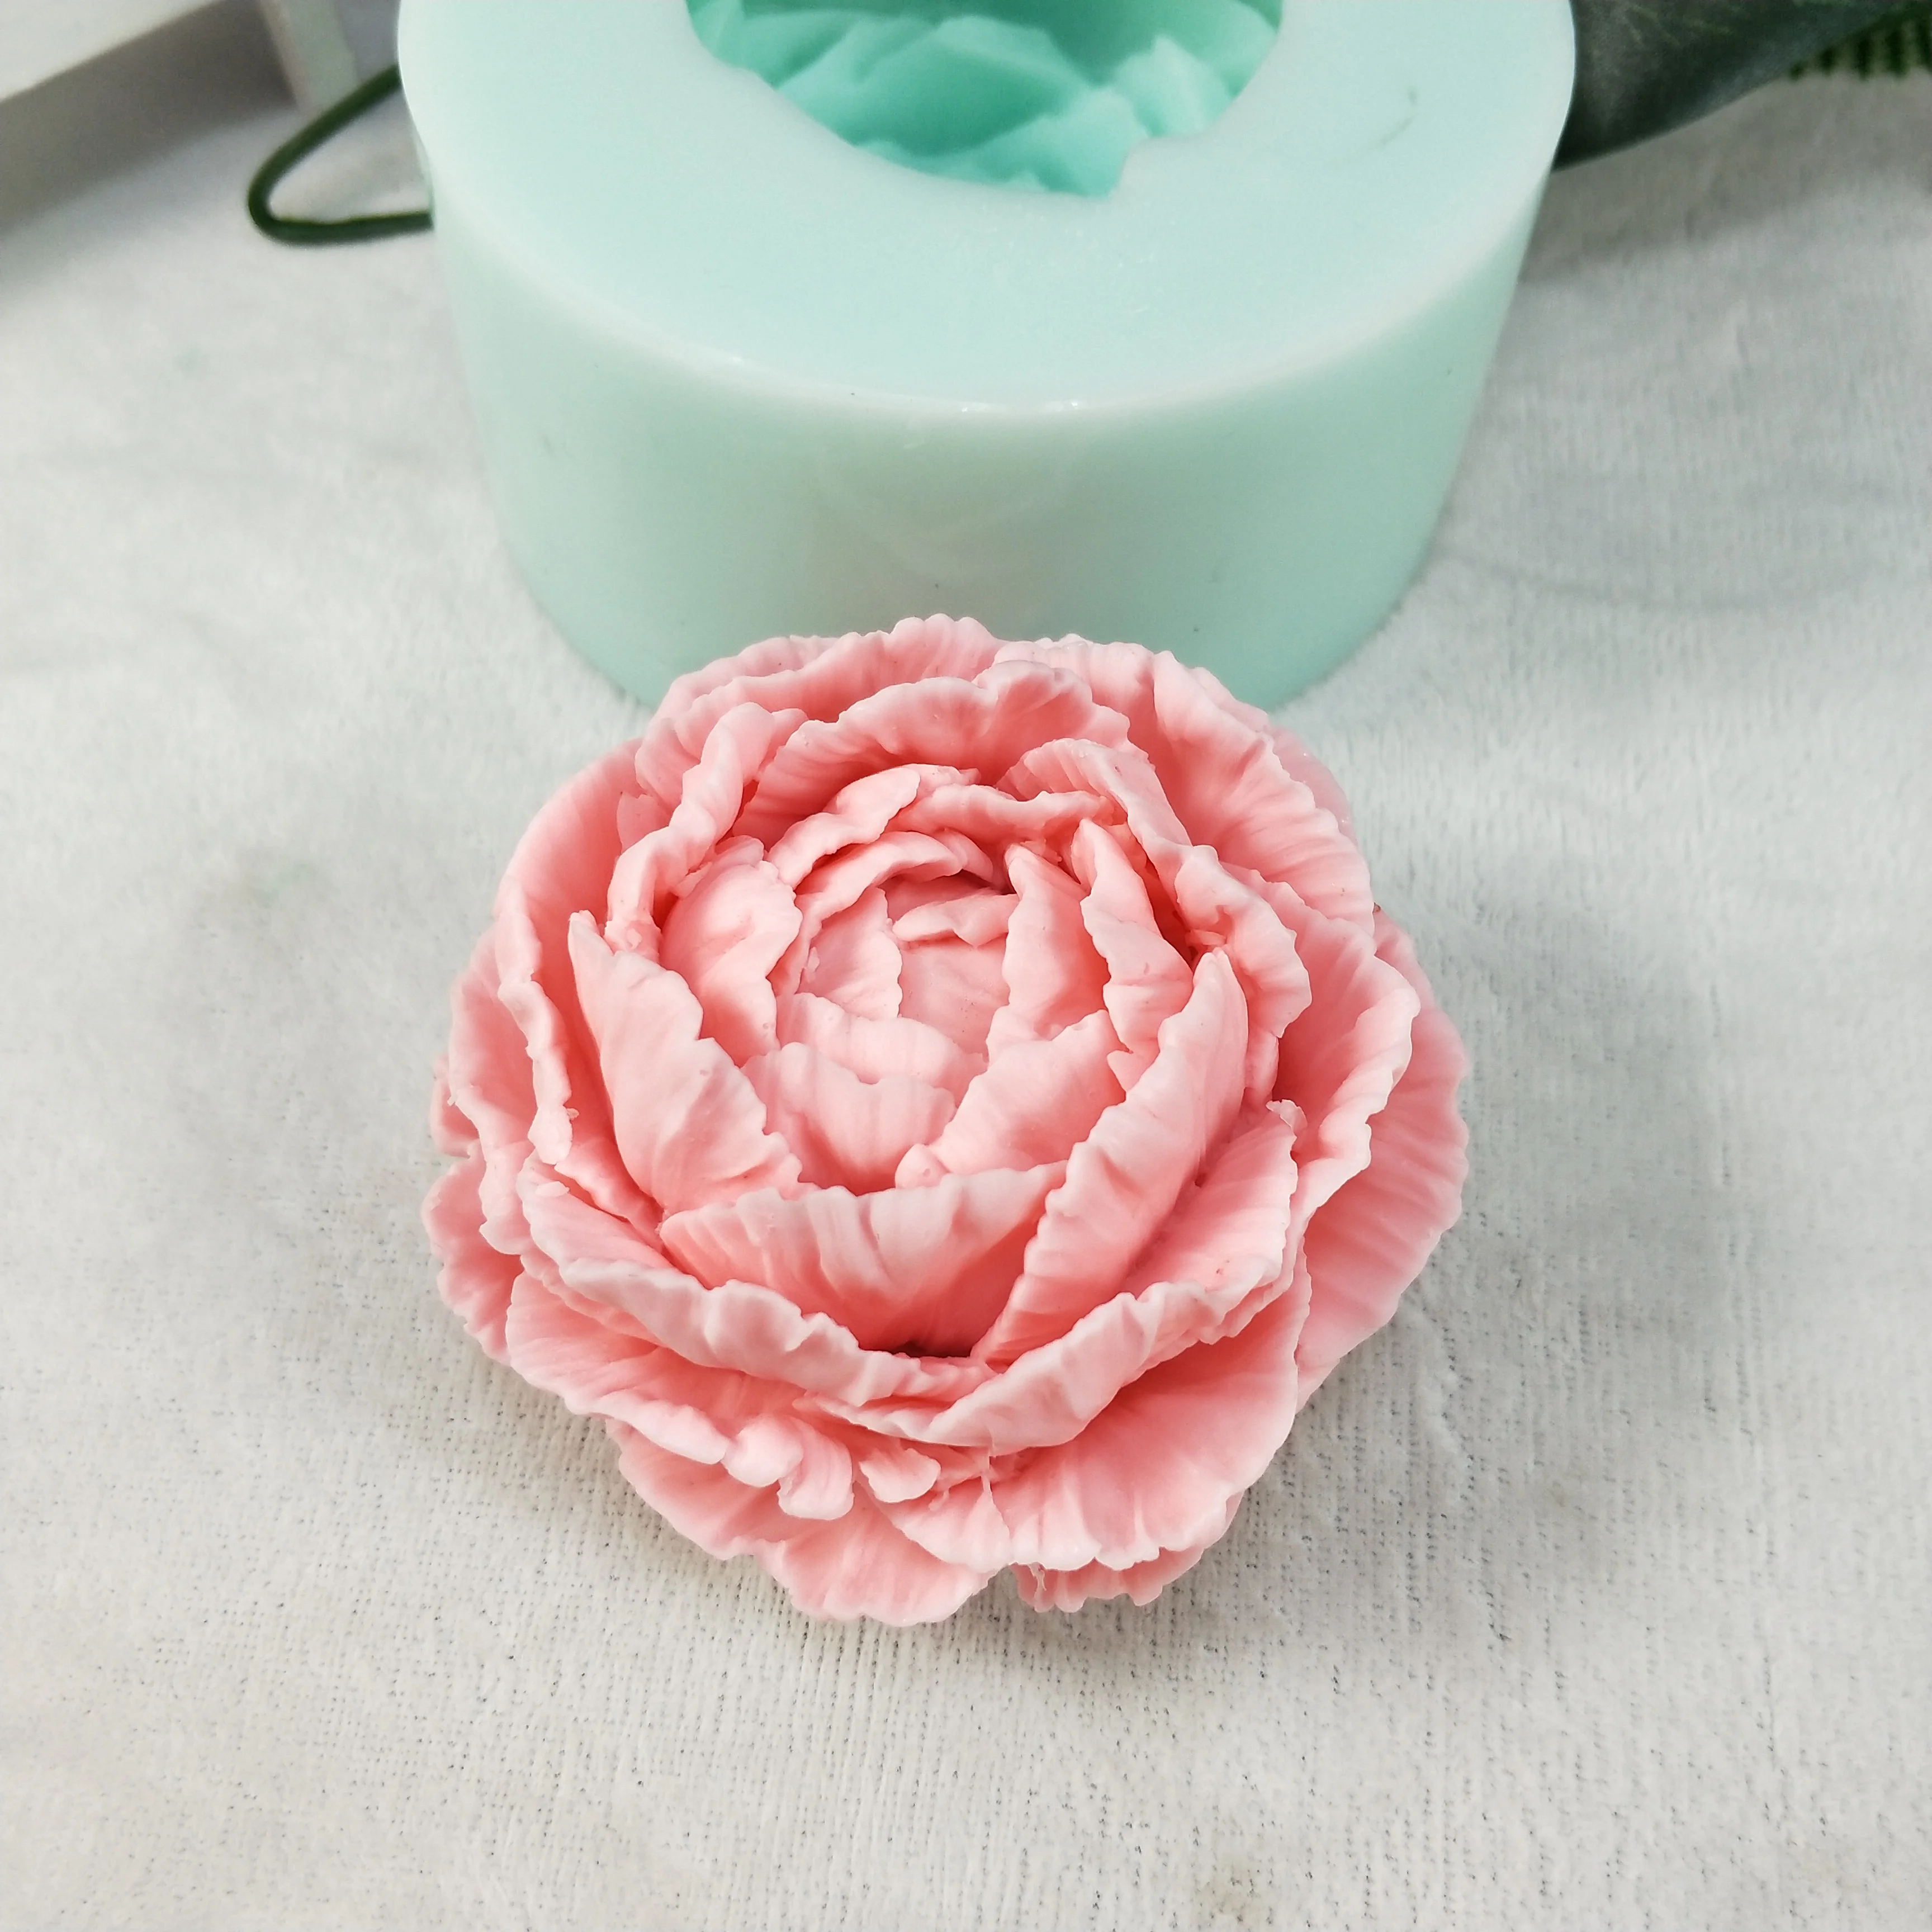 HC0209 PRZY Peony Flowers Soap Molds Mold Silicone Peony Flower Molds Bouquet Making Clay Resin Gypsum Chocolate Candle Candy